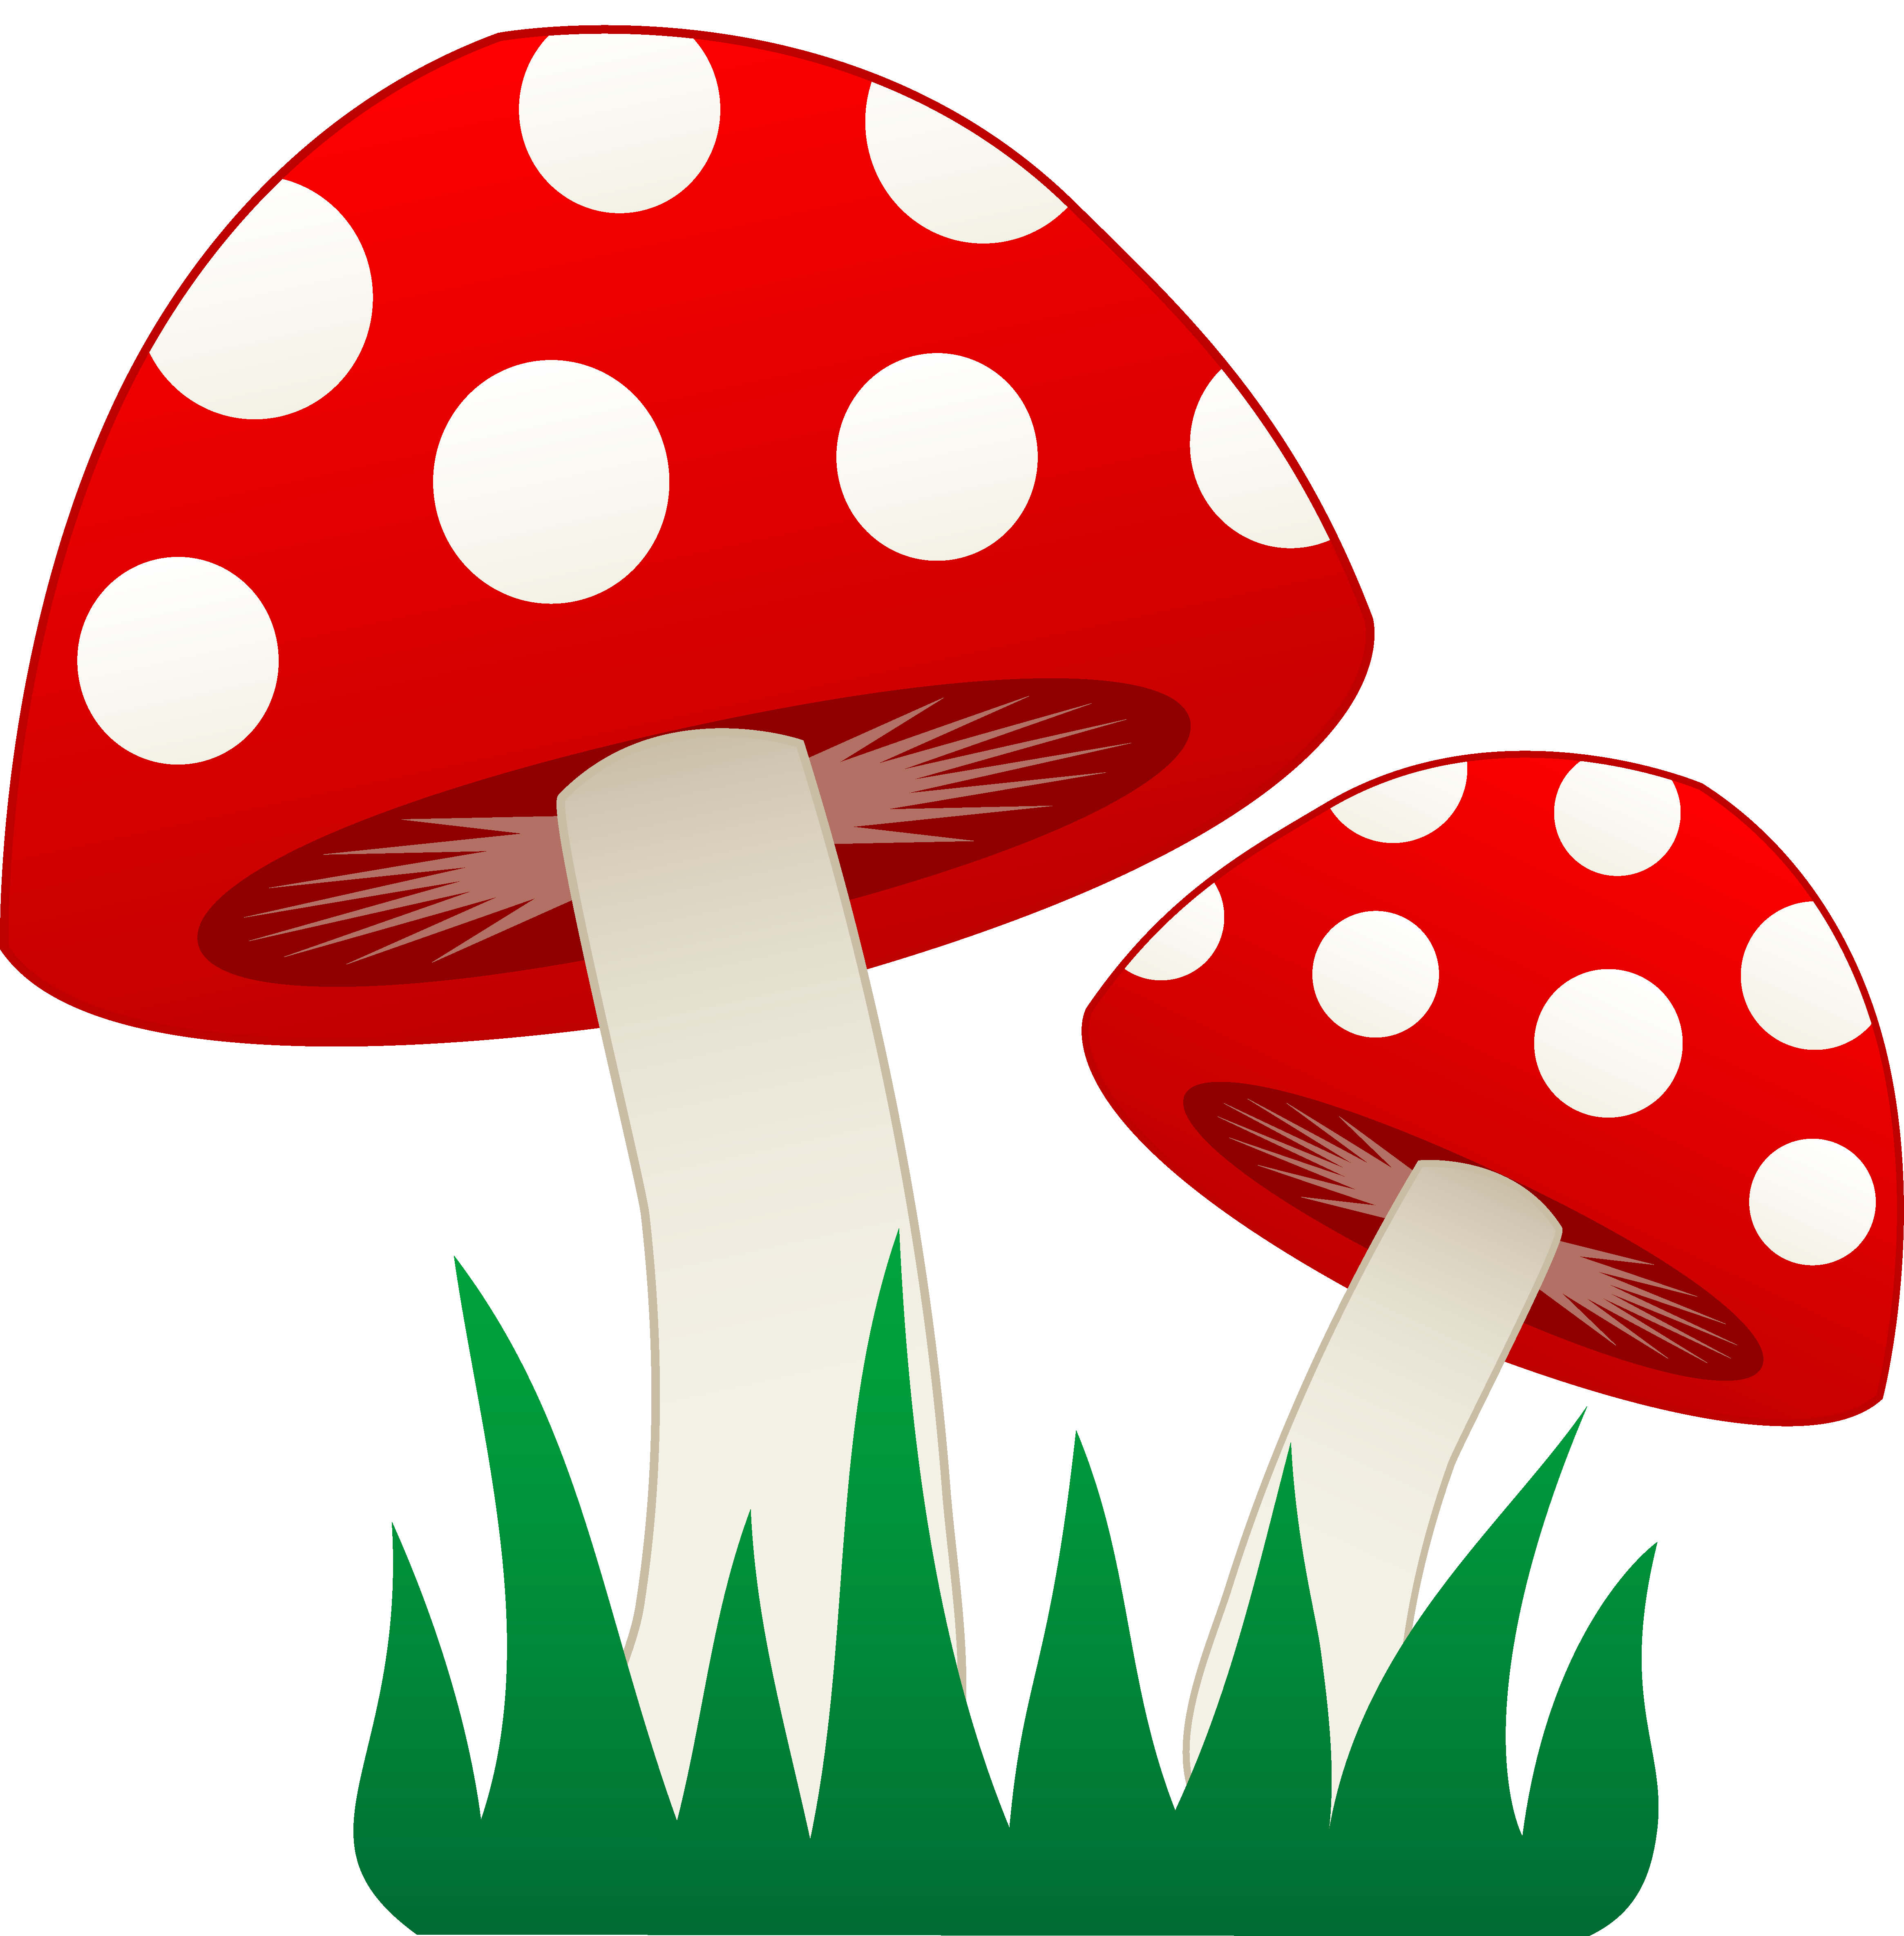 Mushrooms PNG Clipart Picture